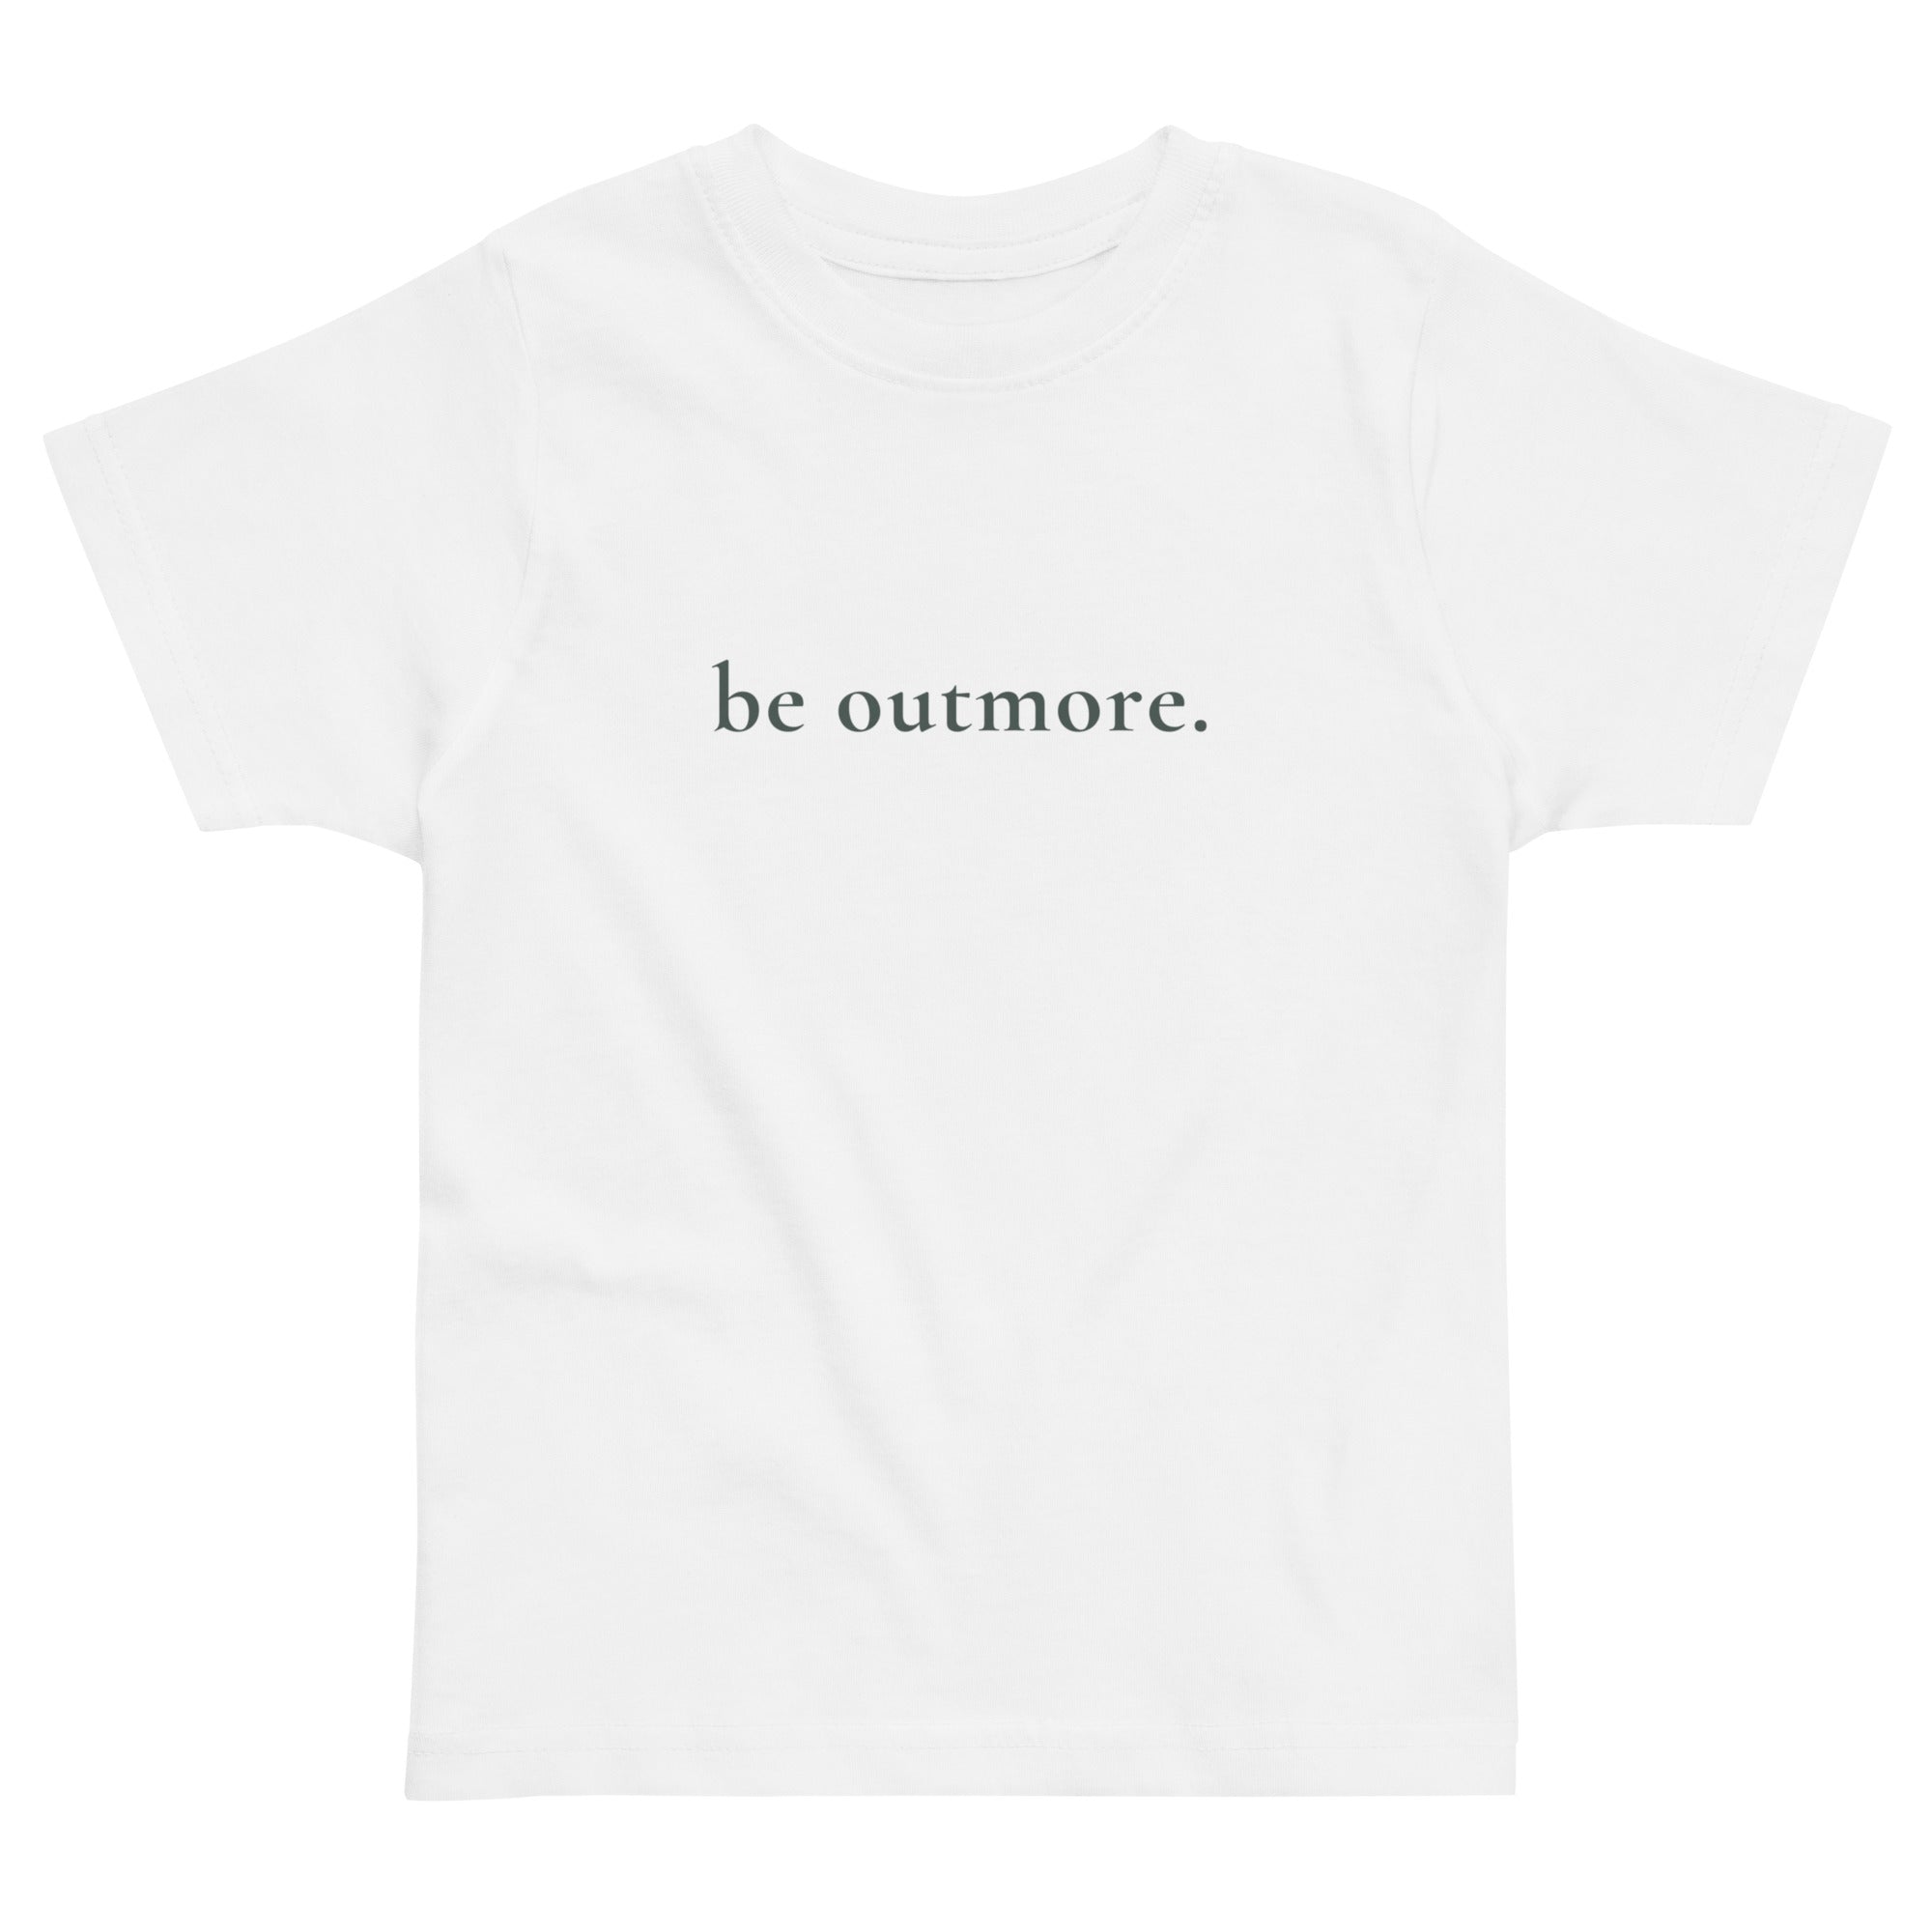 be outmore. Toddler T-Shirt 